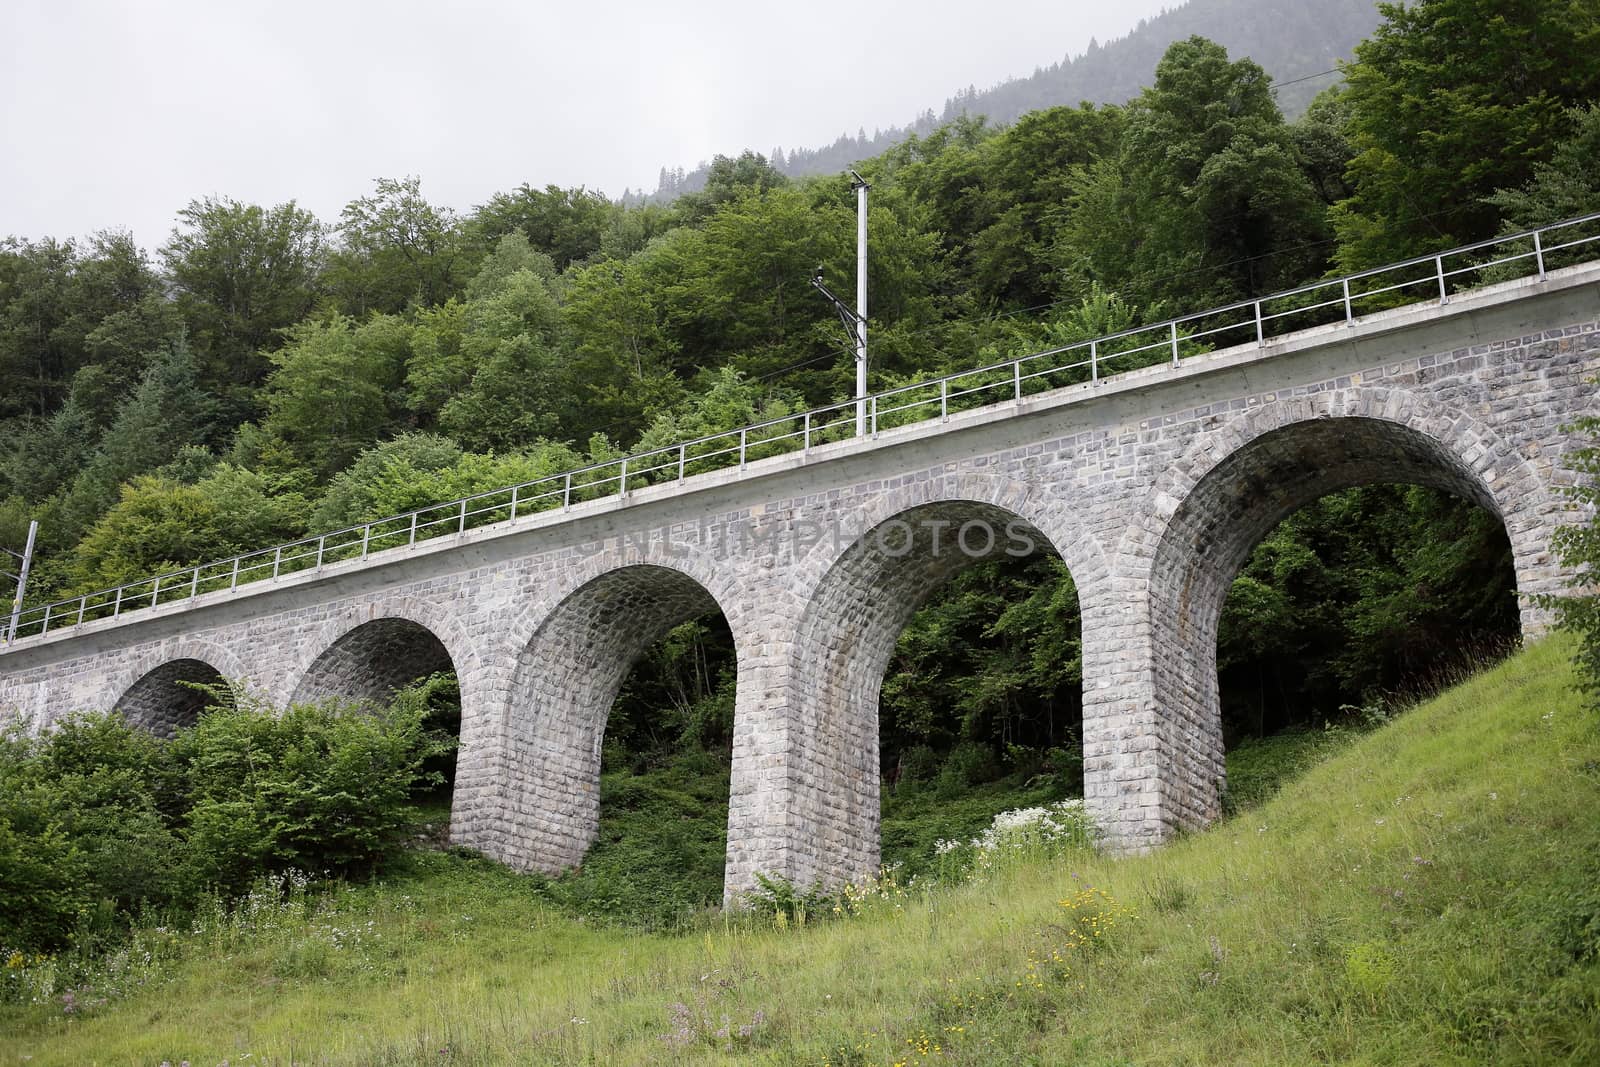 A beautiful road bridge with arches is surrounded by greenery. High quality photo